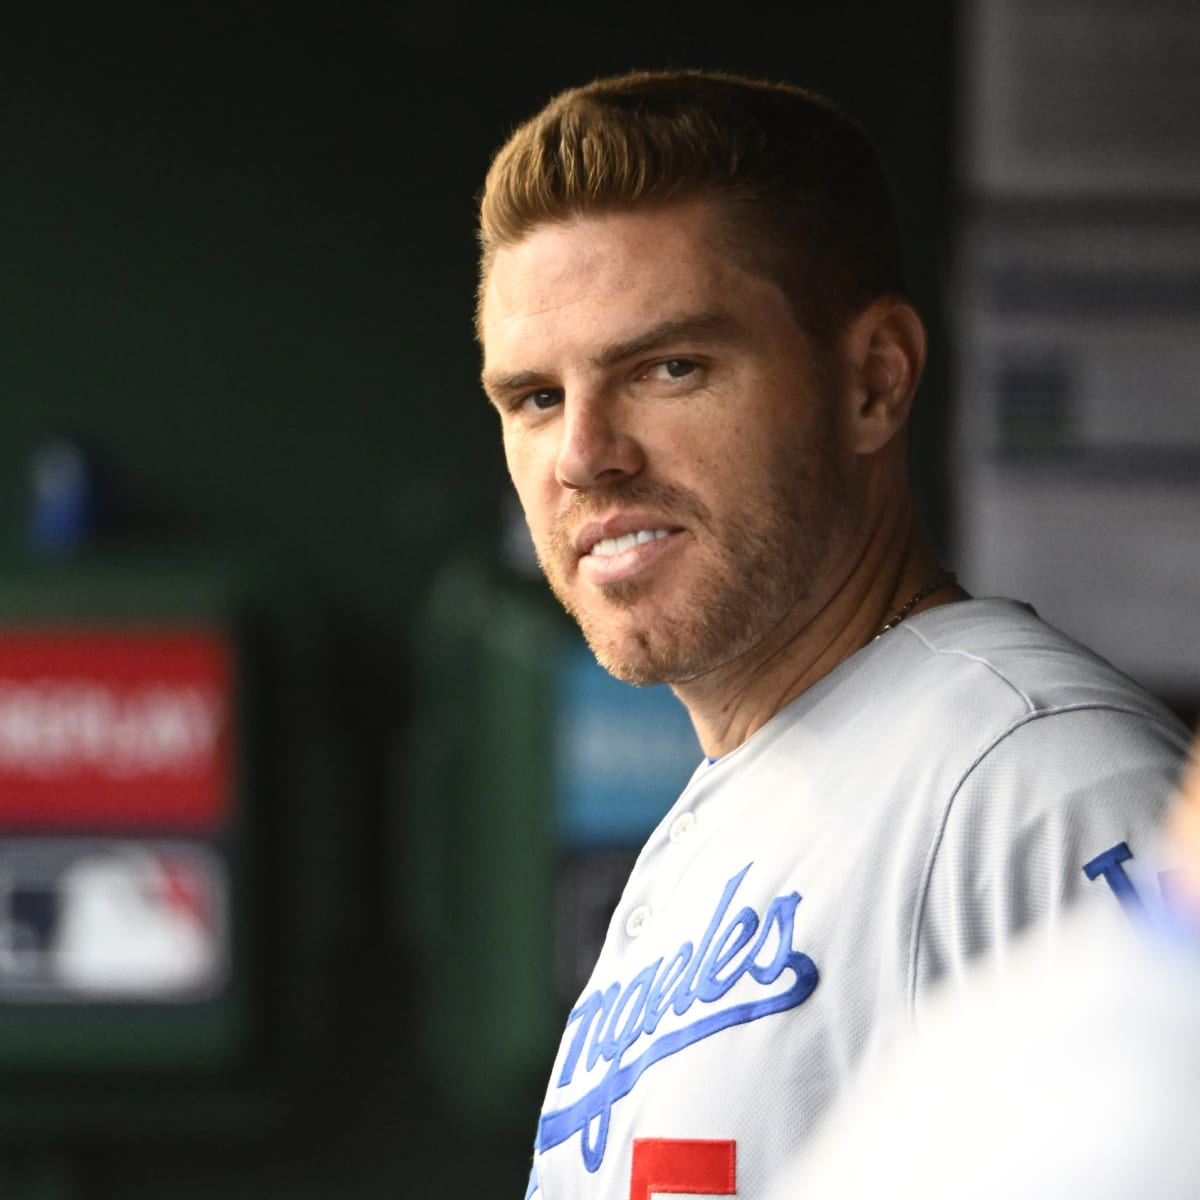 My thoughts on this non story about Freddie Freeman #dodgers #mlb